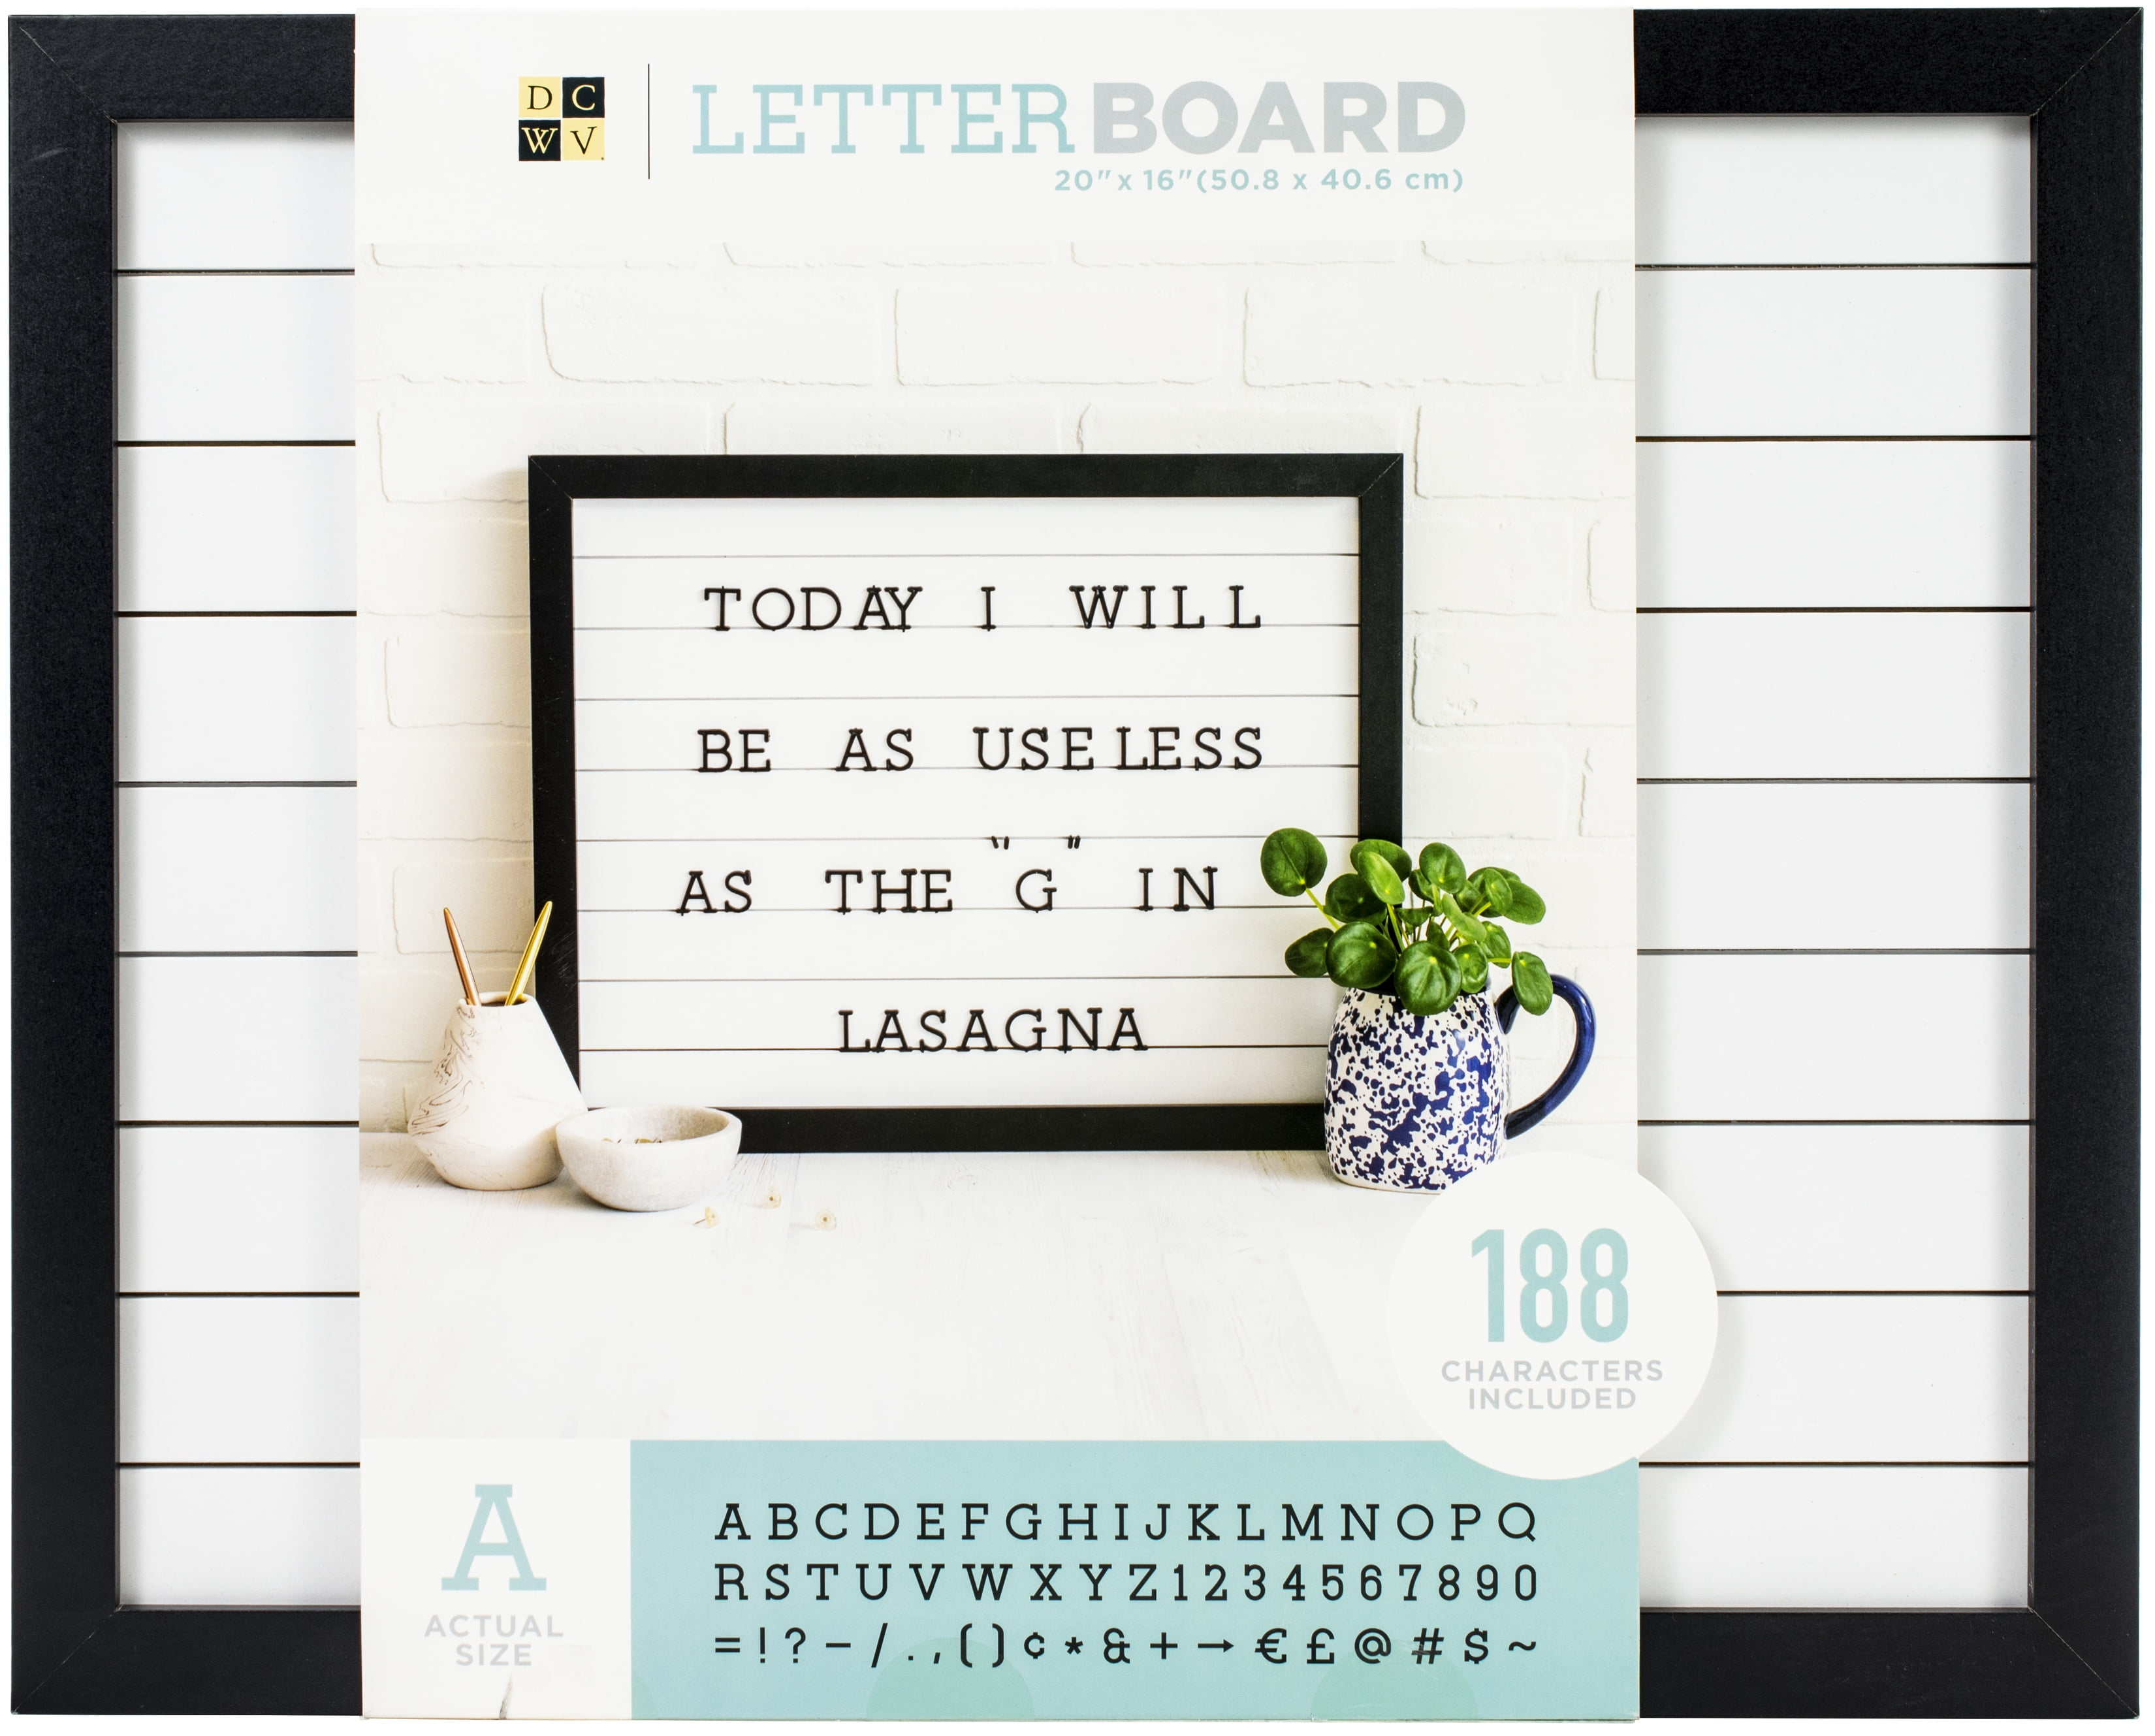 C Crystal Lemon Letter Board, Felt Letter Board, 10x10 Inches, Changeable Wooden Message Board Sign, Wood Frame, Wall Mount, with Display Stand